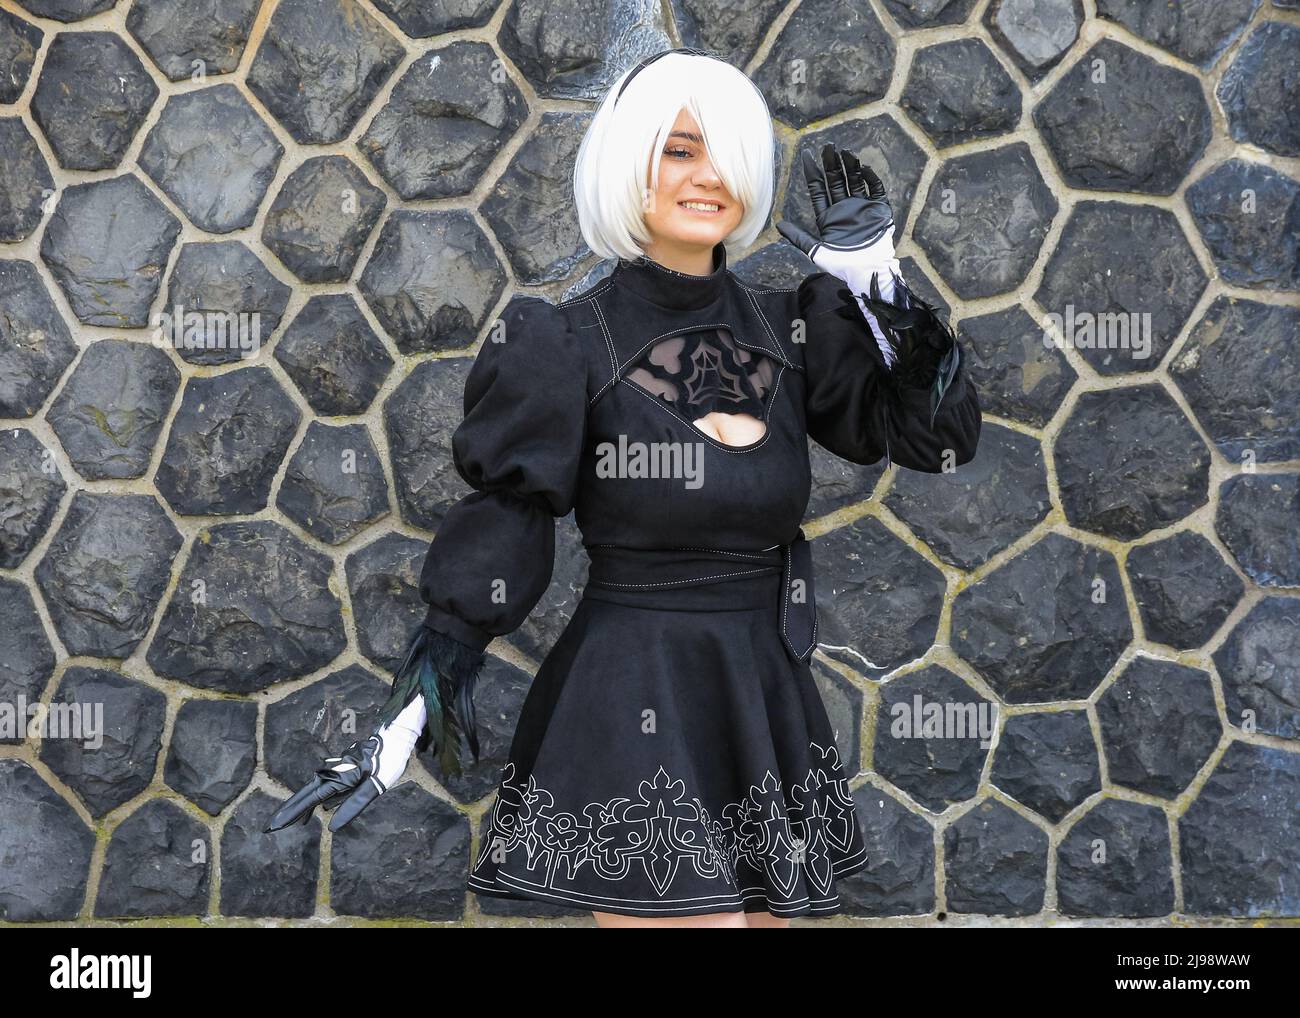 Düsseldorf, NRW, Germany. 21st May, 2022. A cosplayer as 2B from Nier Automata. Tens of thousands of visitors and cosplayers enjoy the warm sunshine along the river Rhine embankment in their outfits inspired by Japanese anime, video and games. Stage performances, cosplay, stalls and demonstrations of Japanese culture, sports and traditions are featured at Düsseldorf's annual Japan Day, celebrating Japan and the Japanese community in the city. Düsseldorf is home to the largest Japanese community in Germany. Credit: Imageplotter/Alamy Live News Stock Photo